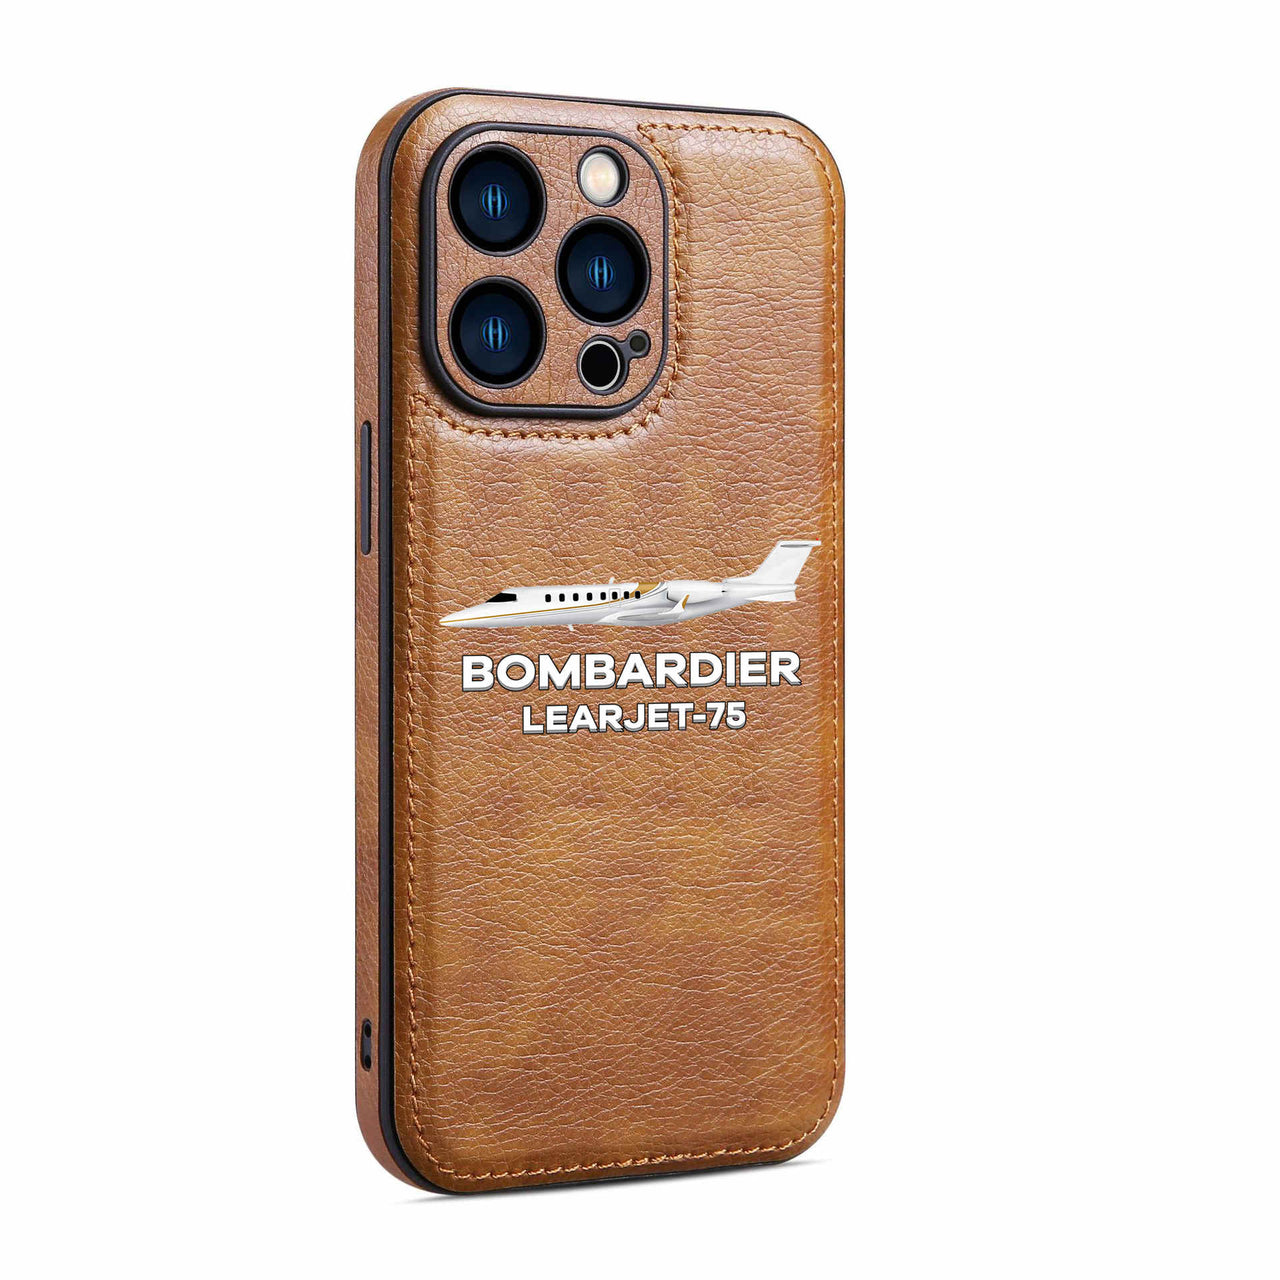 The Bombardier Learjet 75 Designed Leather iPhone Cases